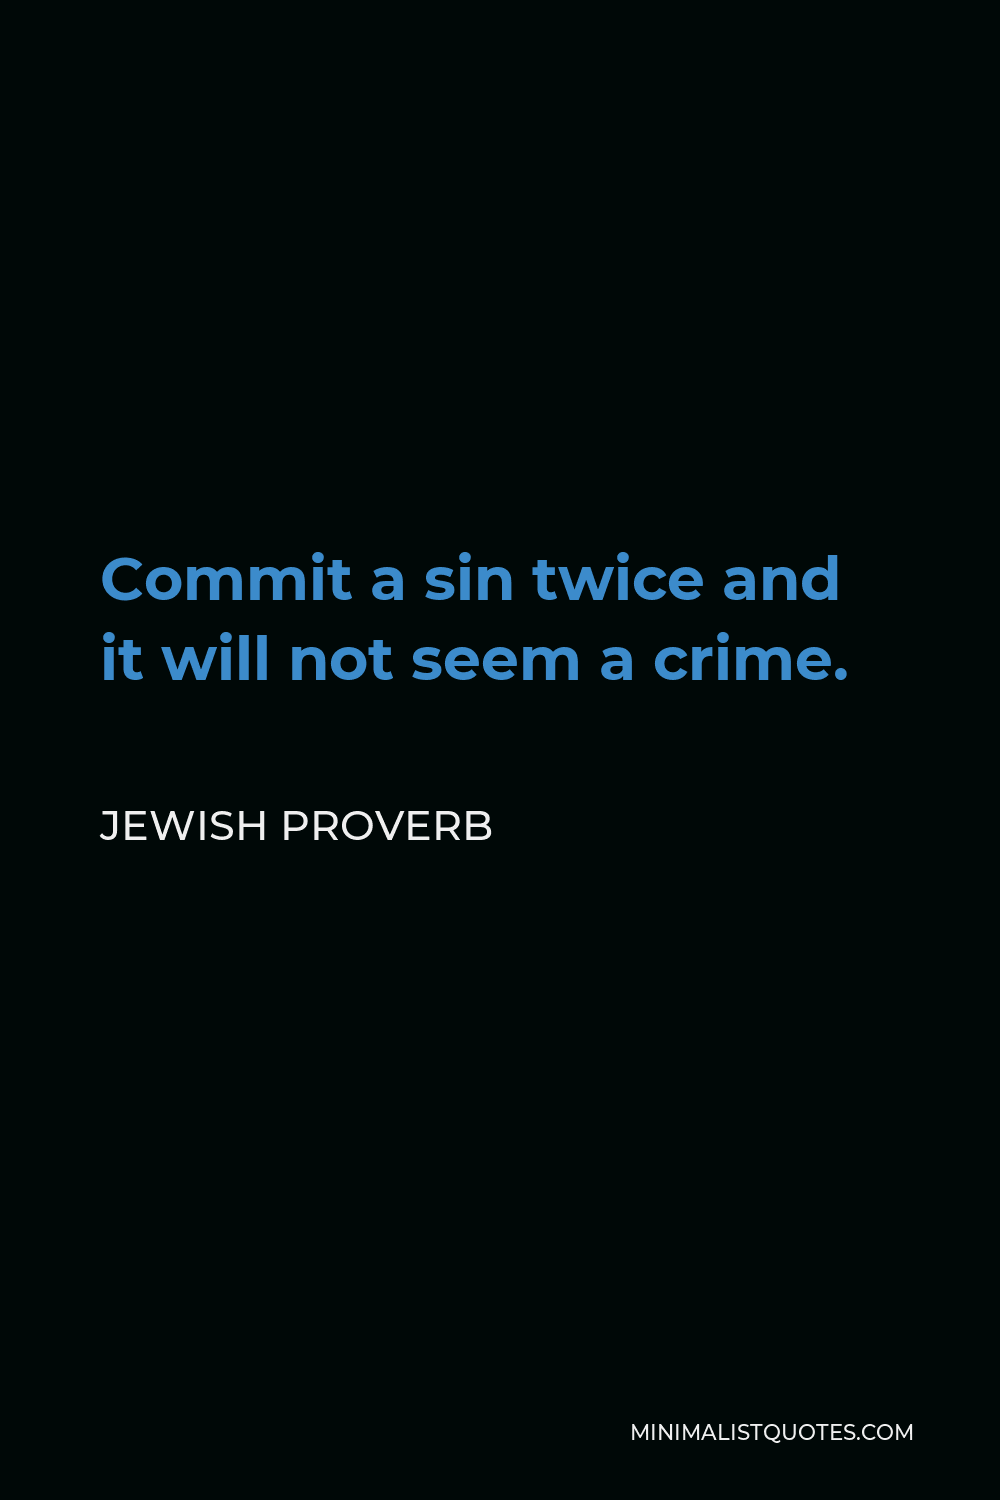 Jewish Proverb Quote - Commit a sin twice and it will not seem a crime.